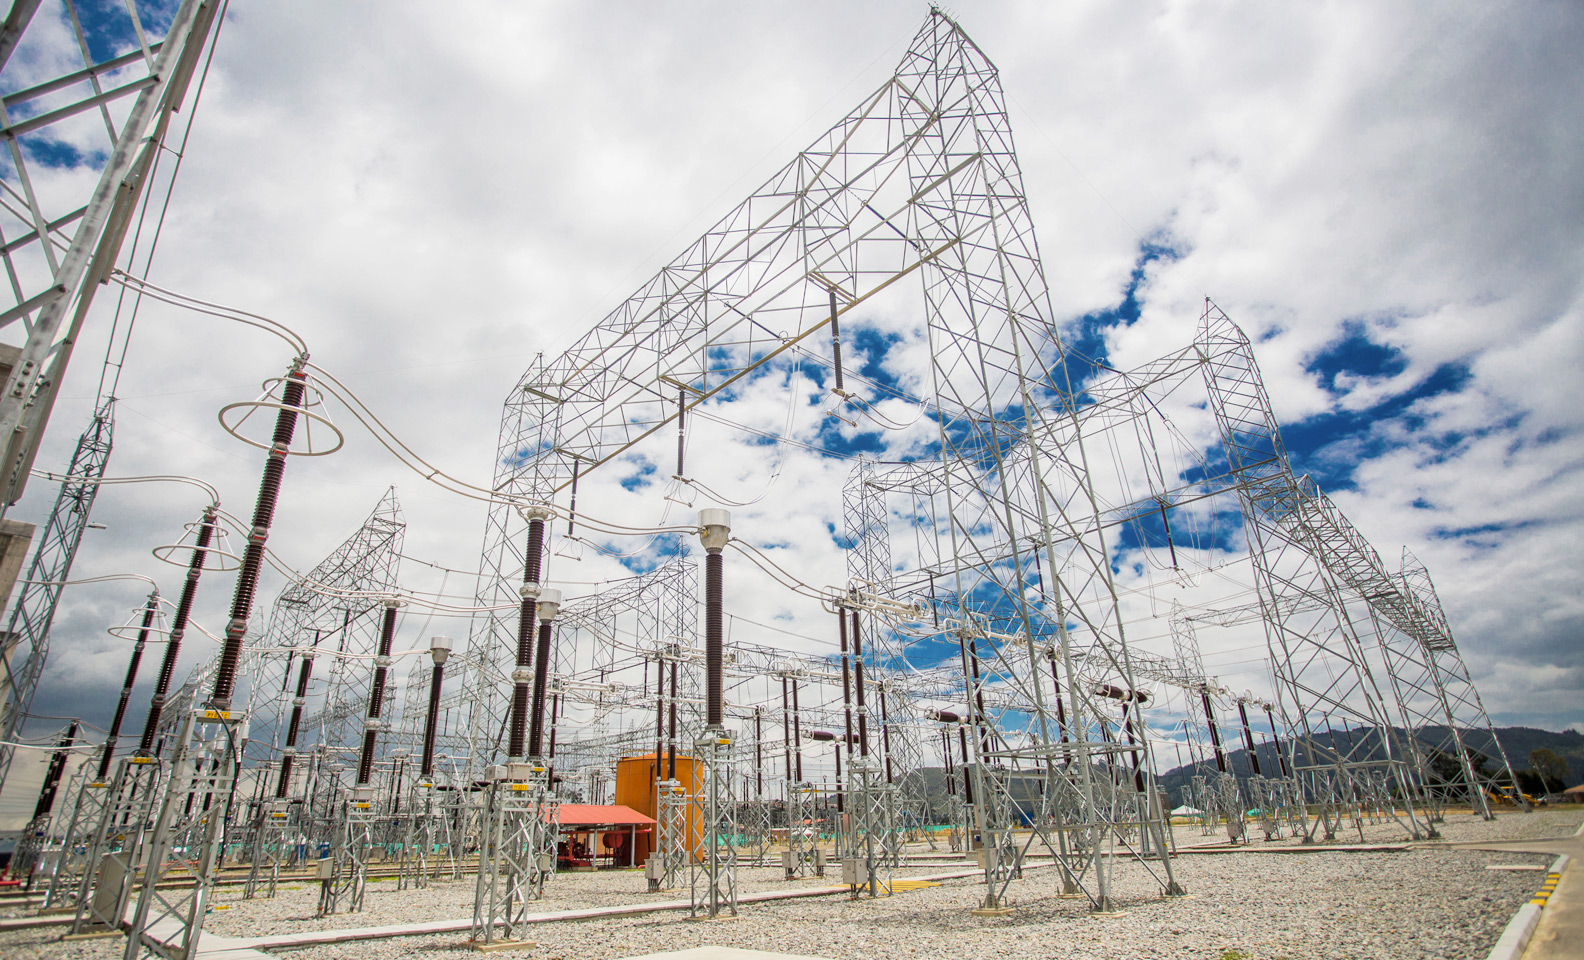 The Bacata substation in Colombia